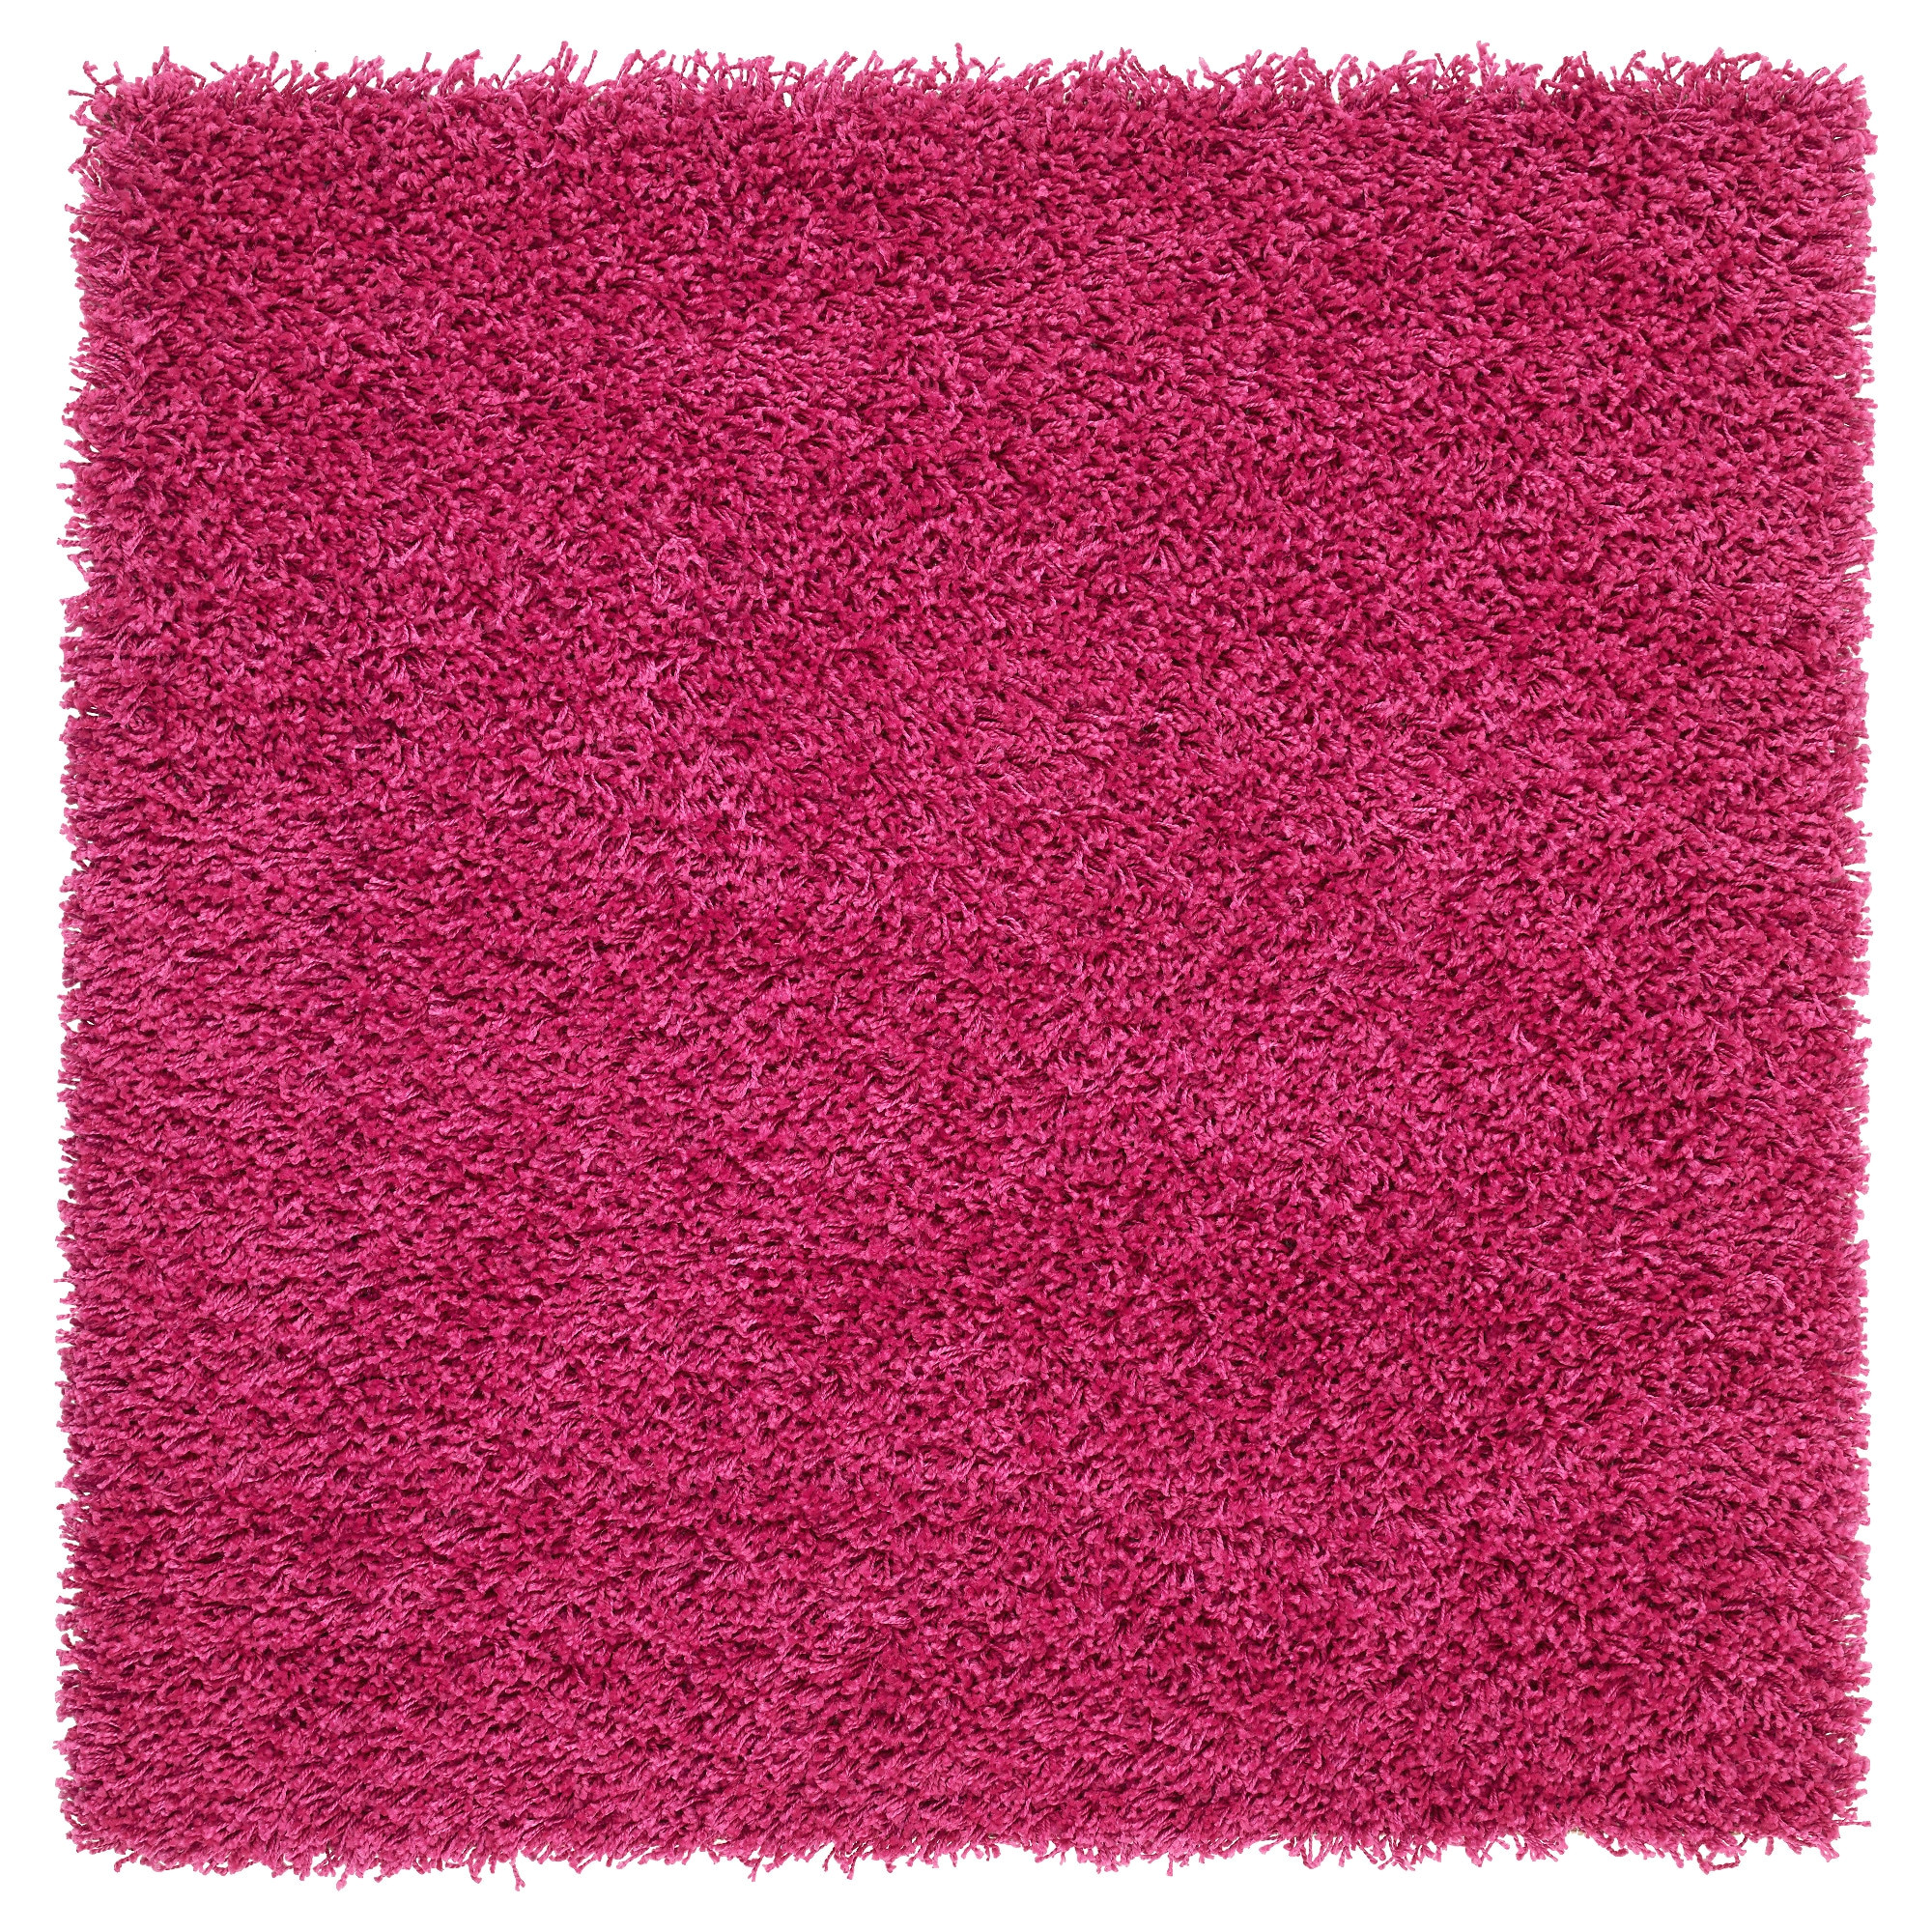 ikea hampen rug high pile the high pile makes it easy to join several rugs